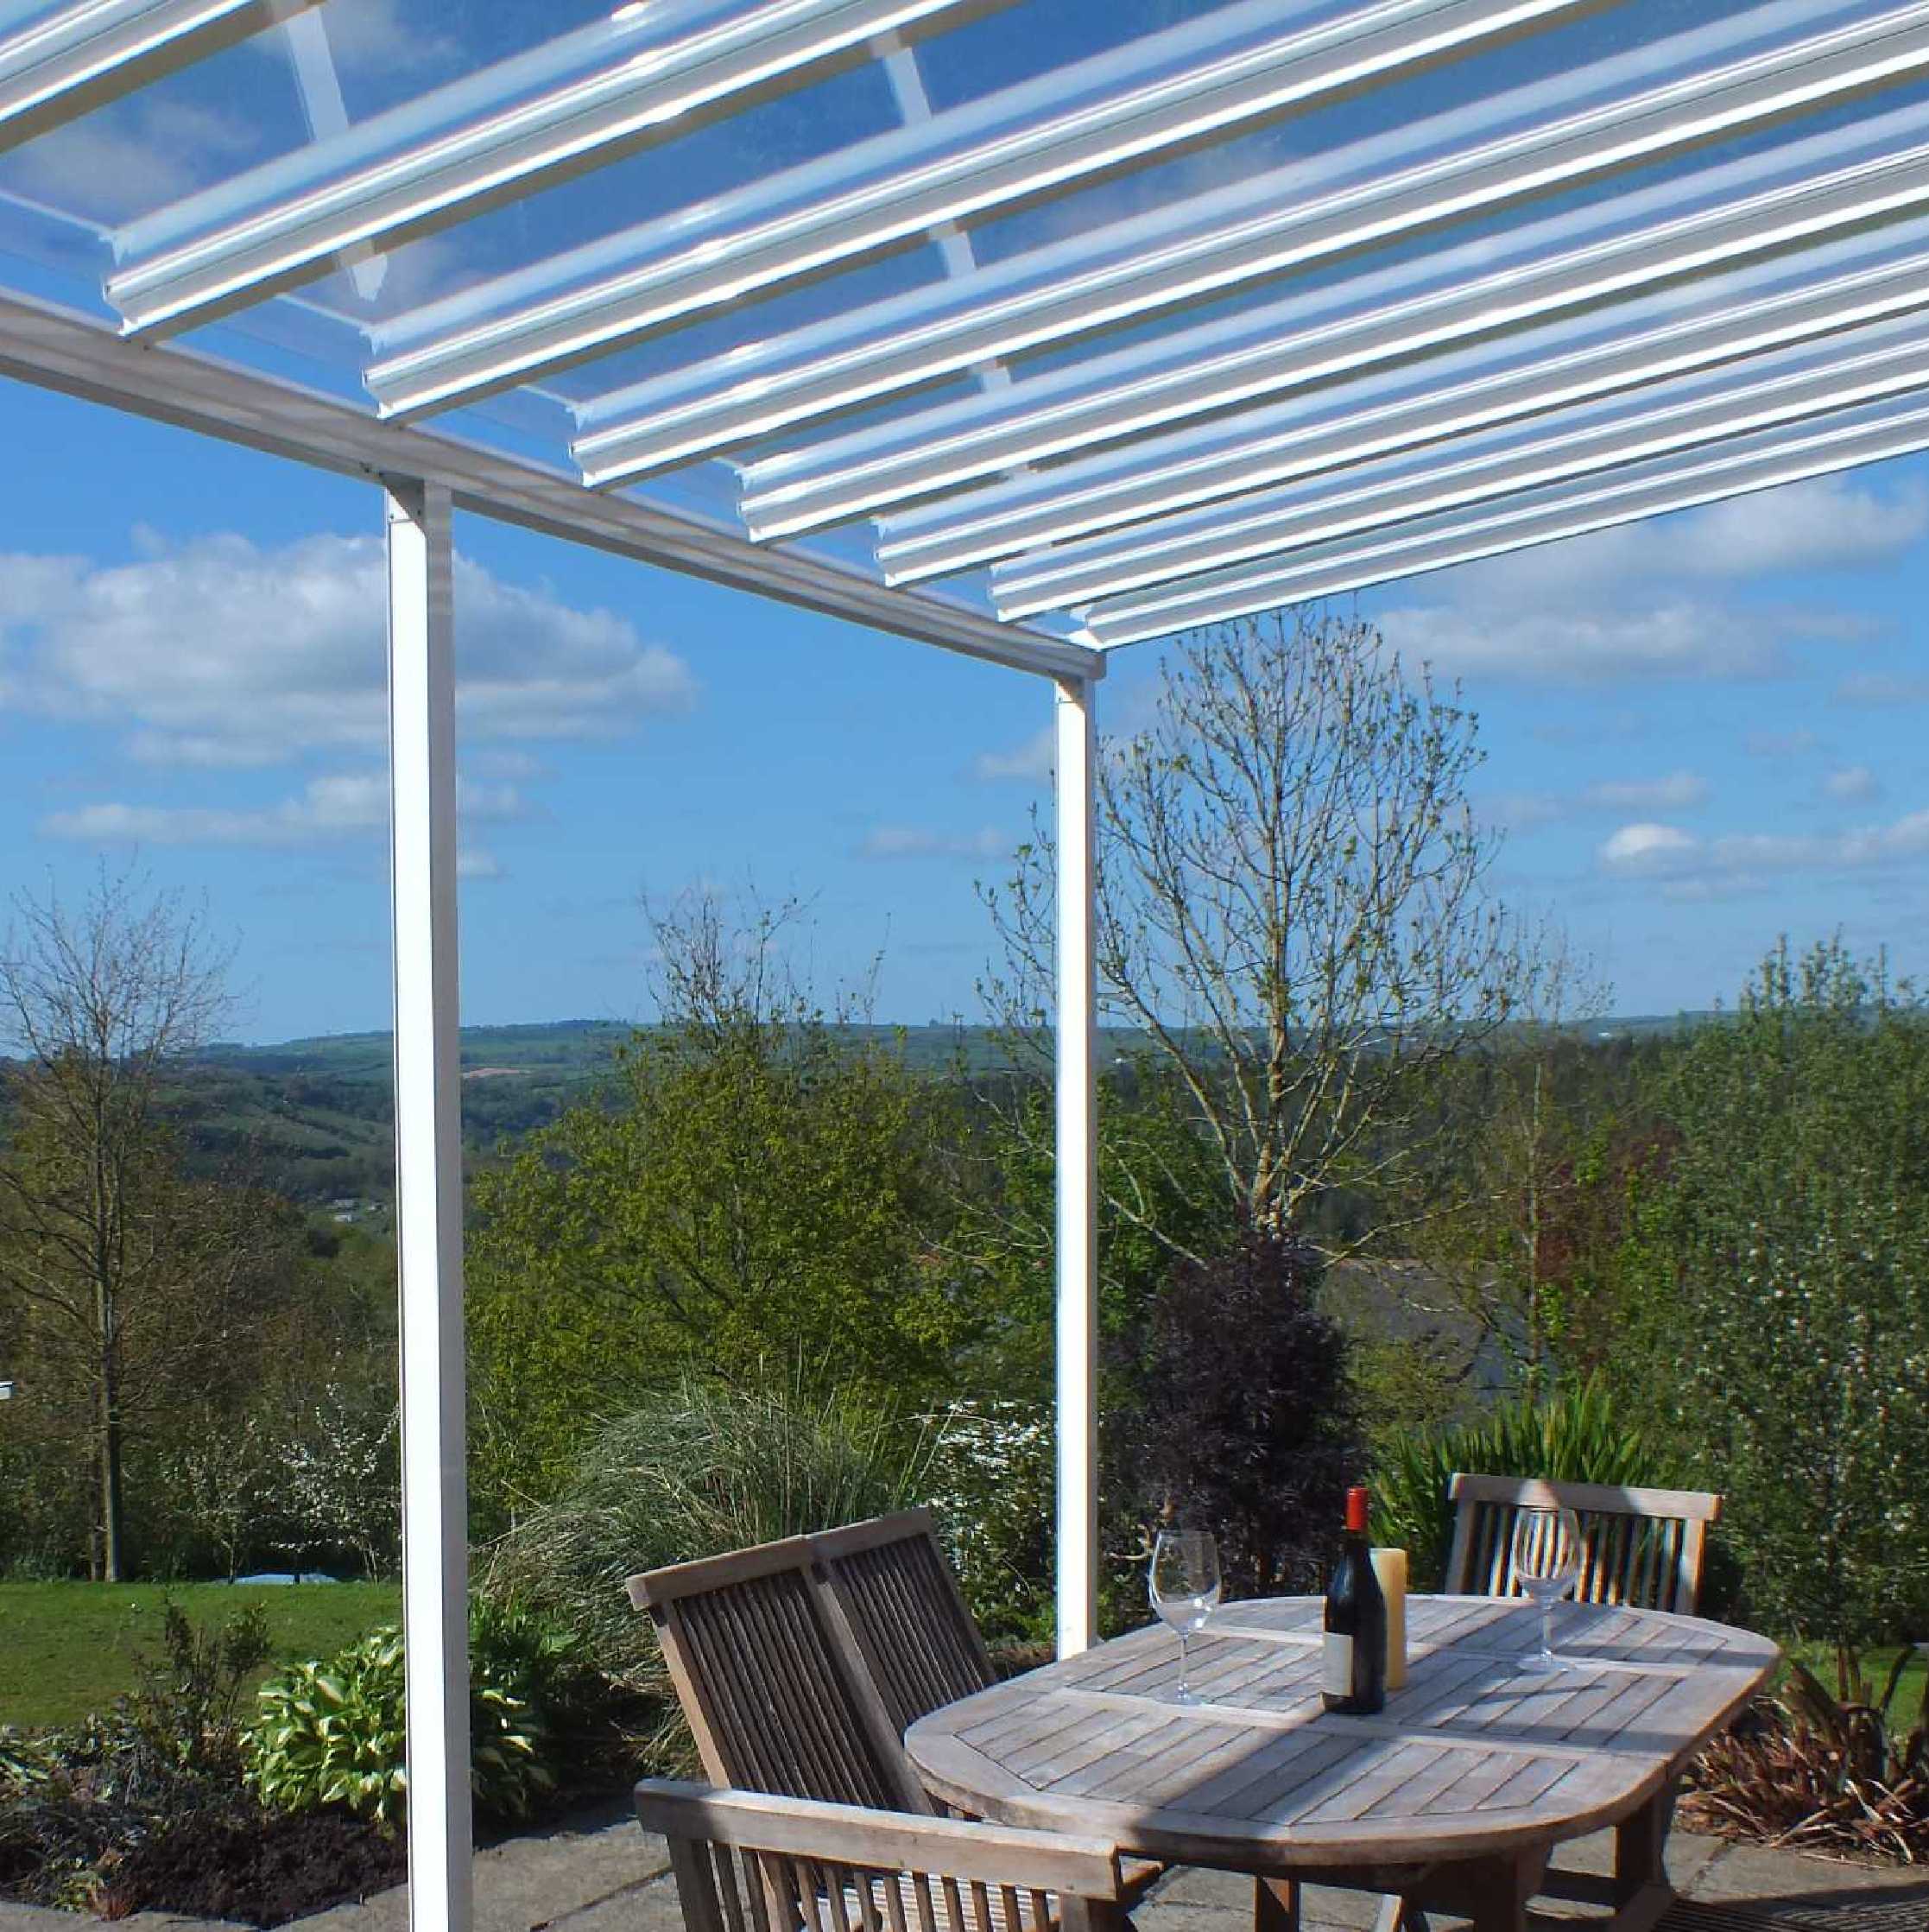 Buy Omega Smart Lean-To Canopy, White UNGLAZED for 6mm Glazing - 7.7m (W) x 1.5m (P), (4) Supporting Posts online today